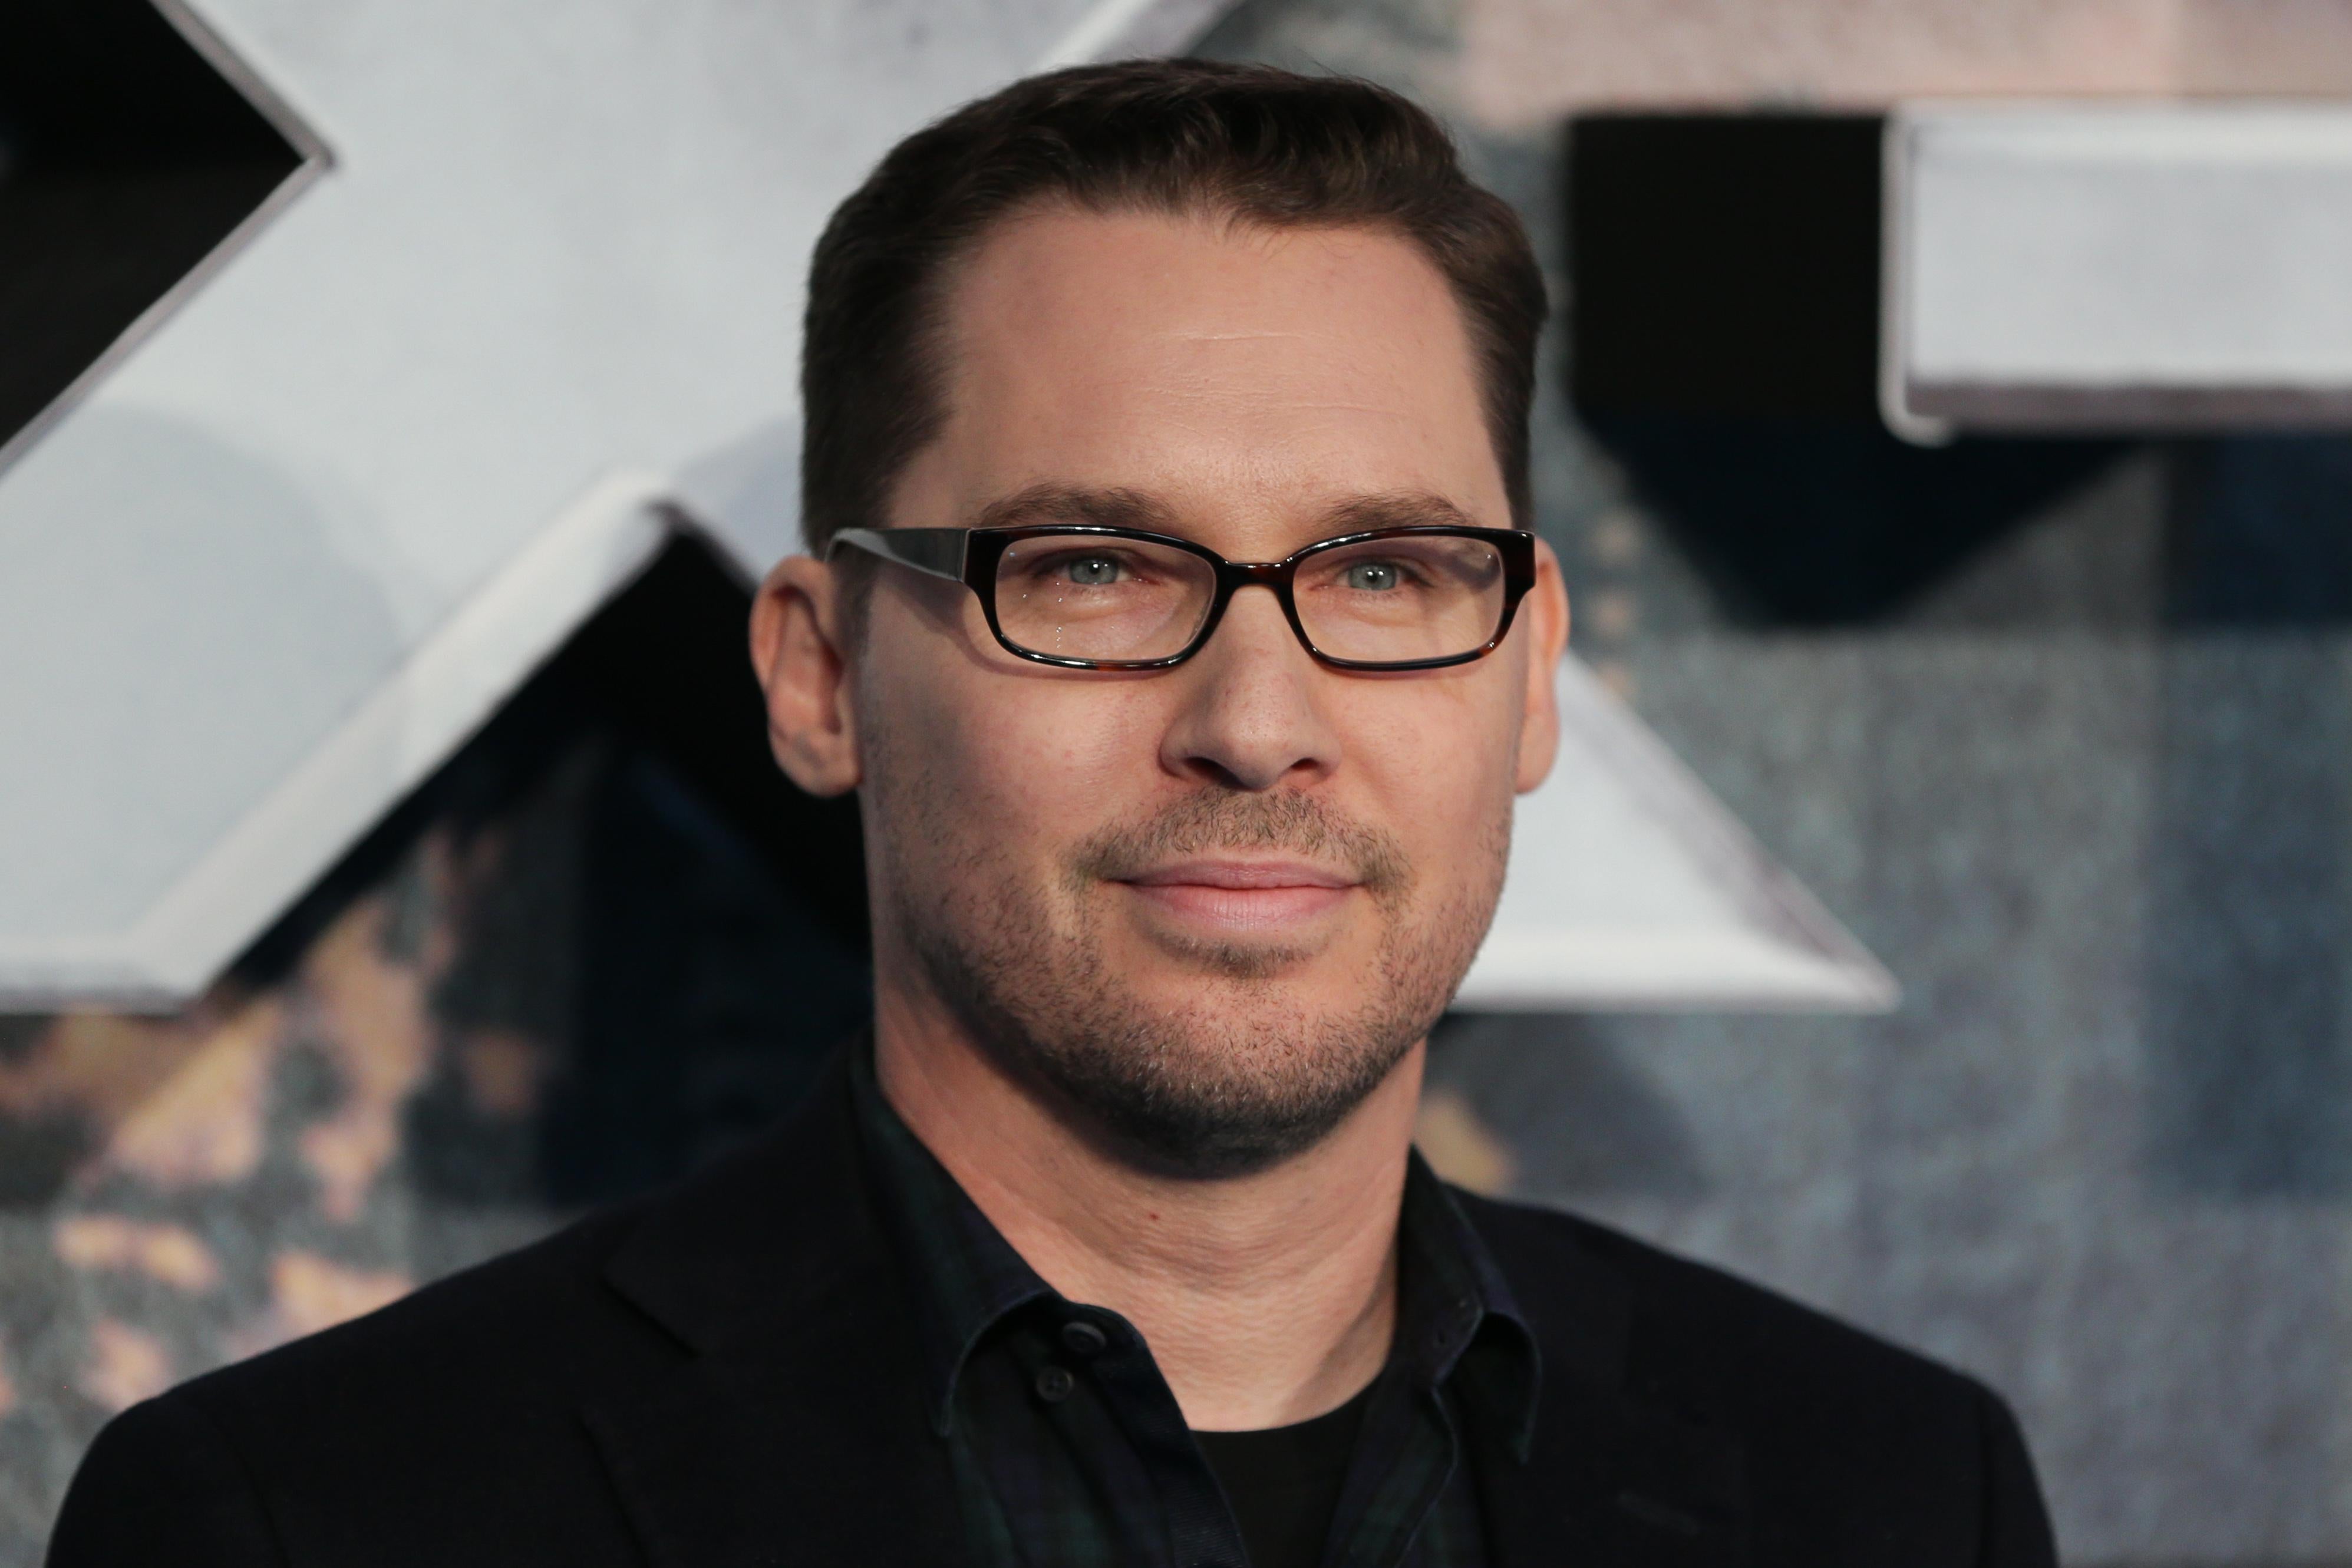 Bryan Singer poses on arrival for the premiere of X-Men Apocalypse.